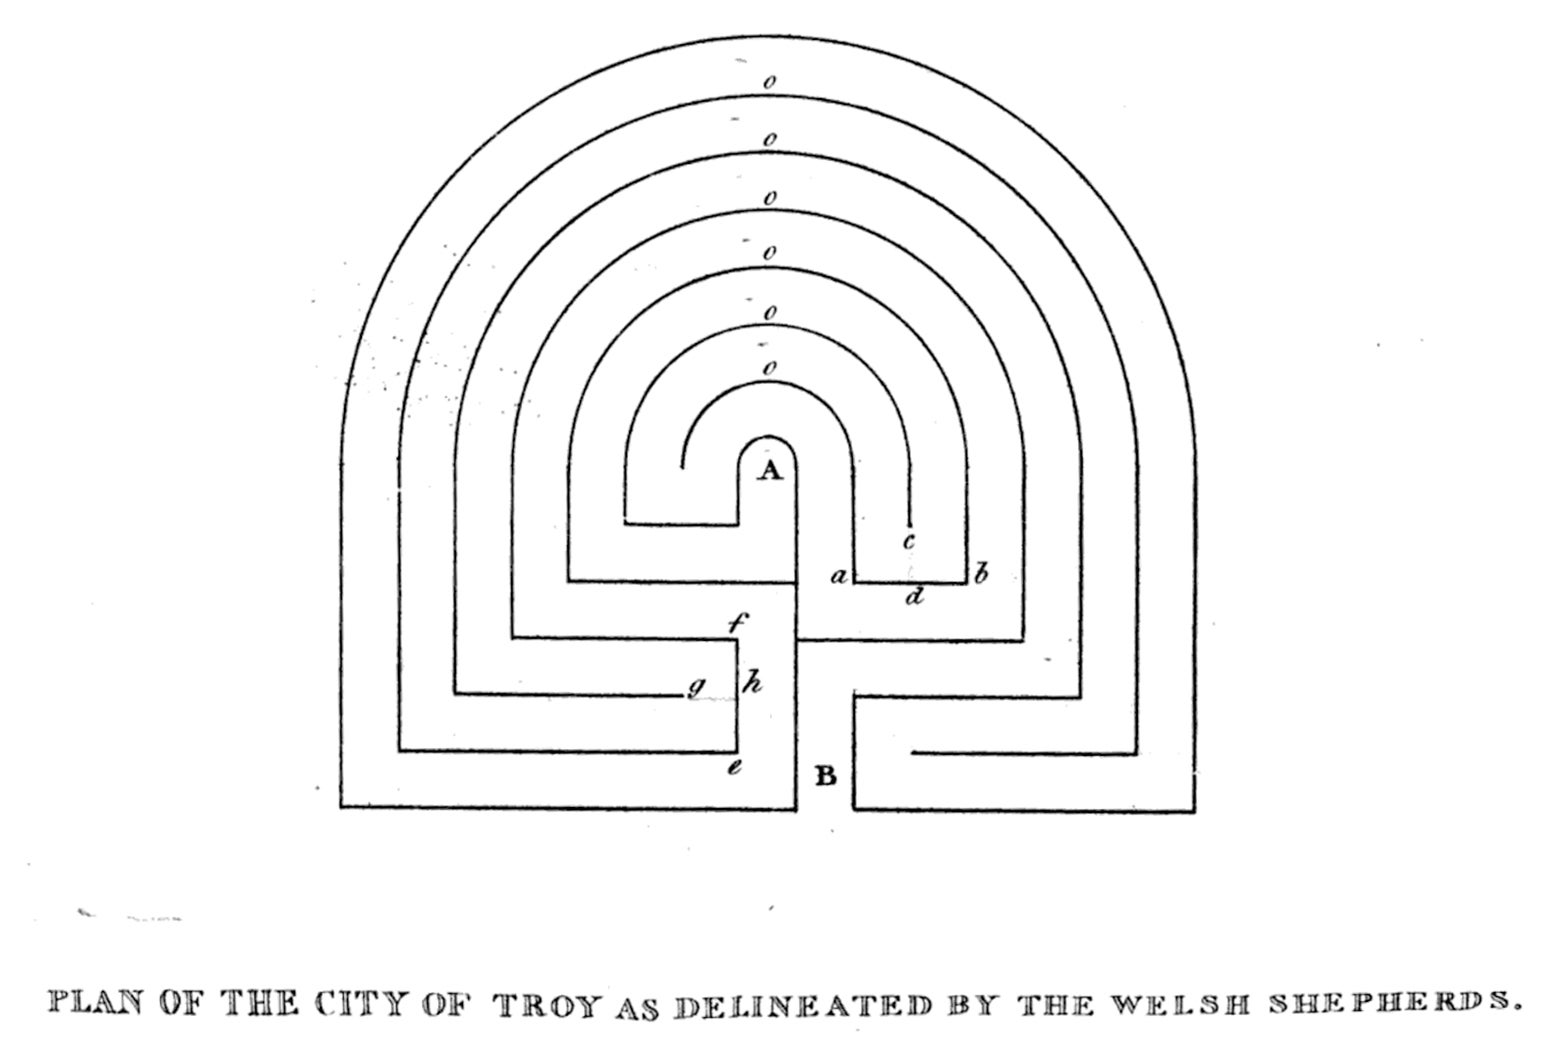 A 19th century illustration of a caerdroia, a maze, captioned "Plan of the city of Troy as delineated by the Welsh shepherds."